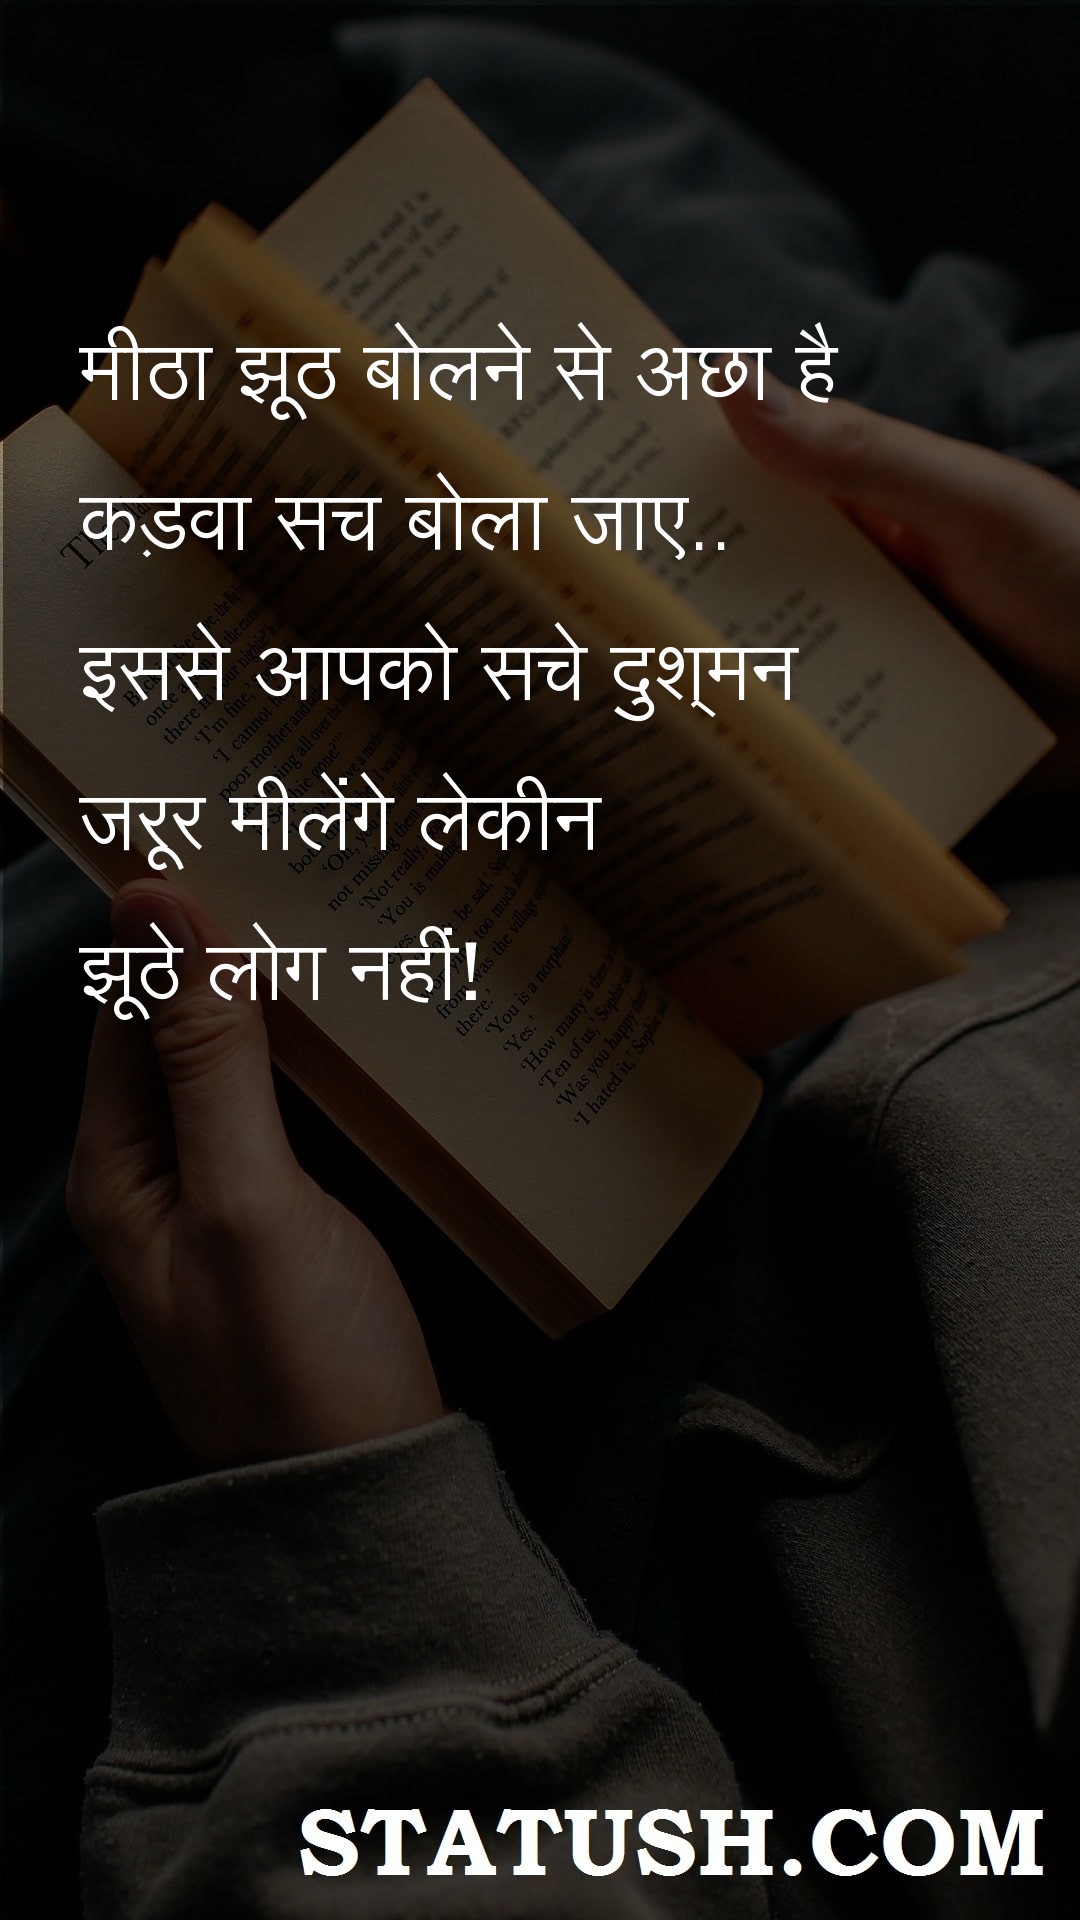 Sweet is better than lying - Hindi Quotes at statush.com